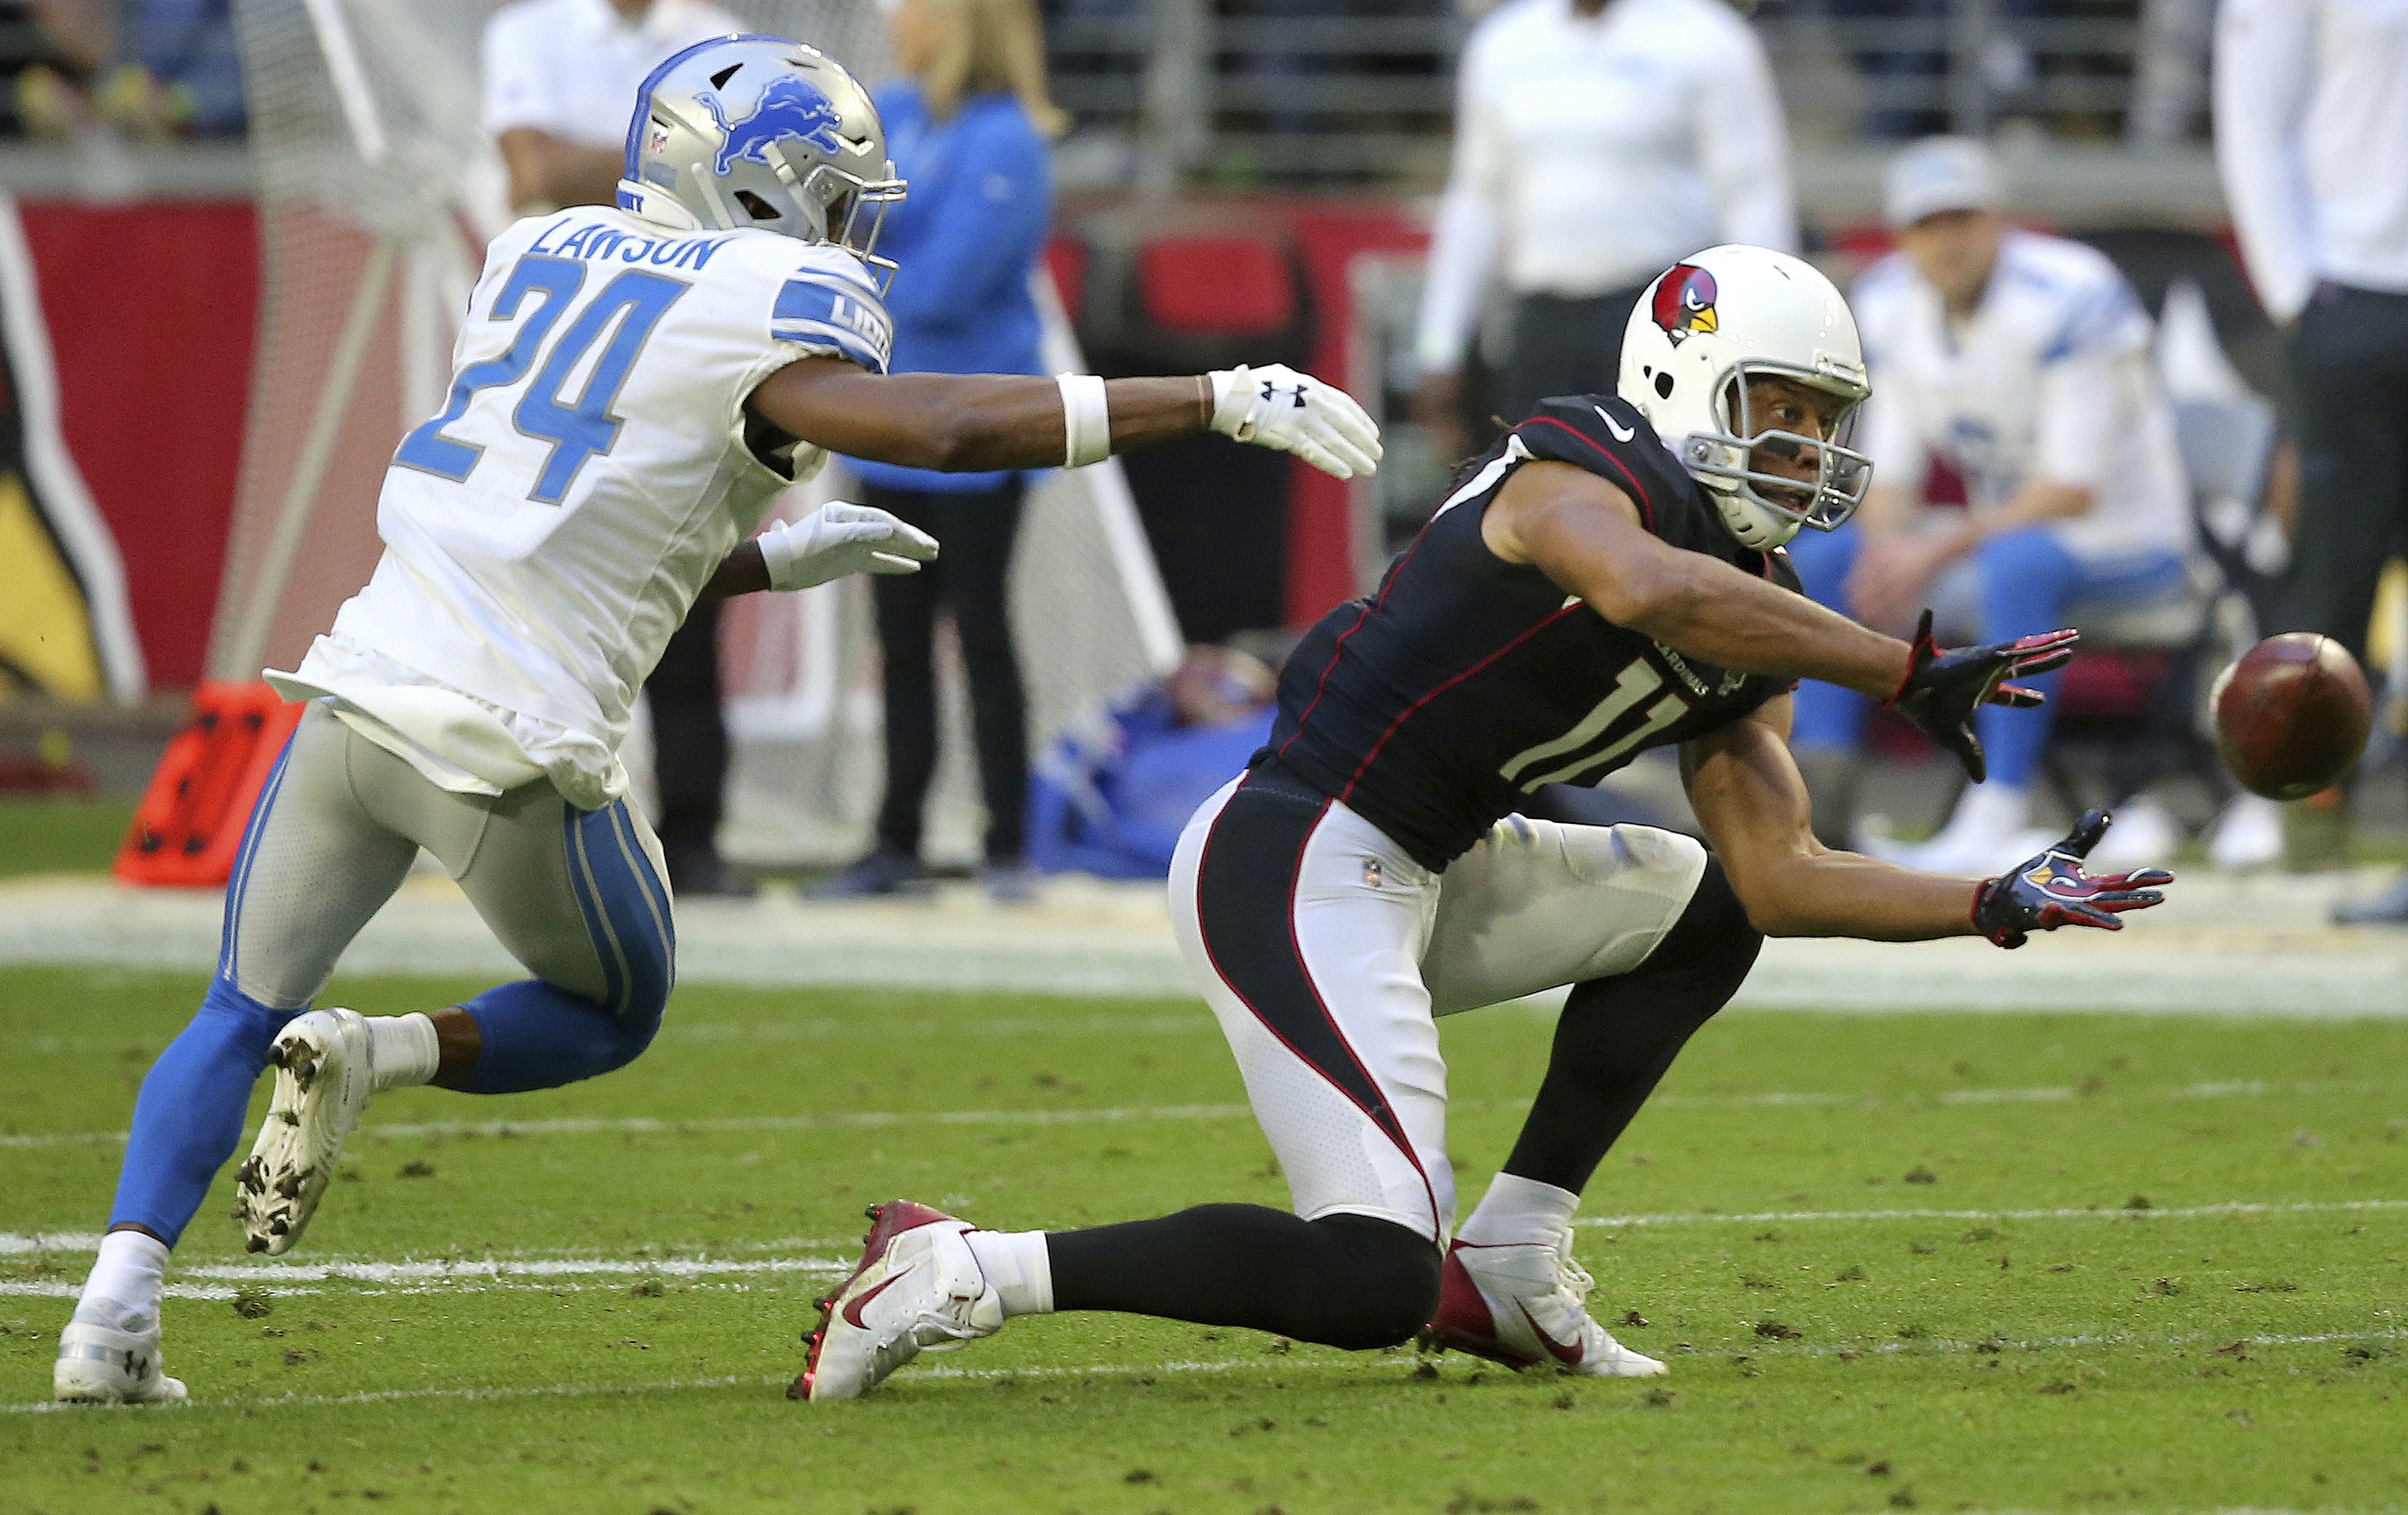 Cardinals offense struggles in 17-3 loss to Lions